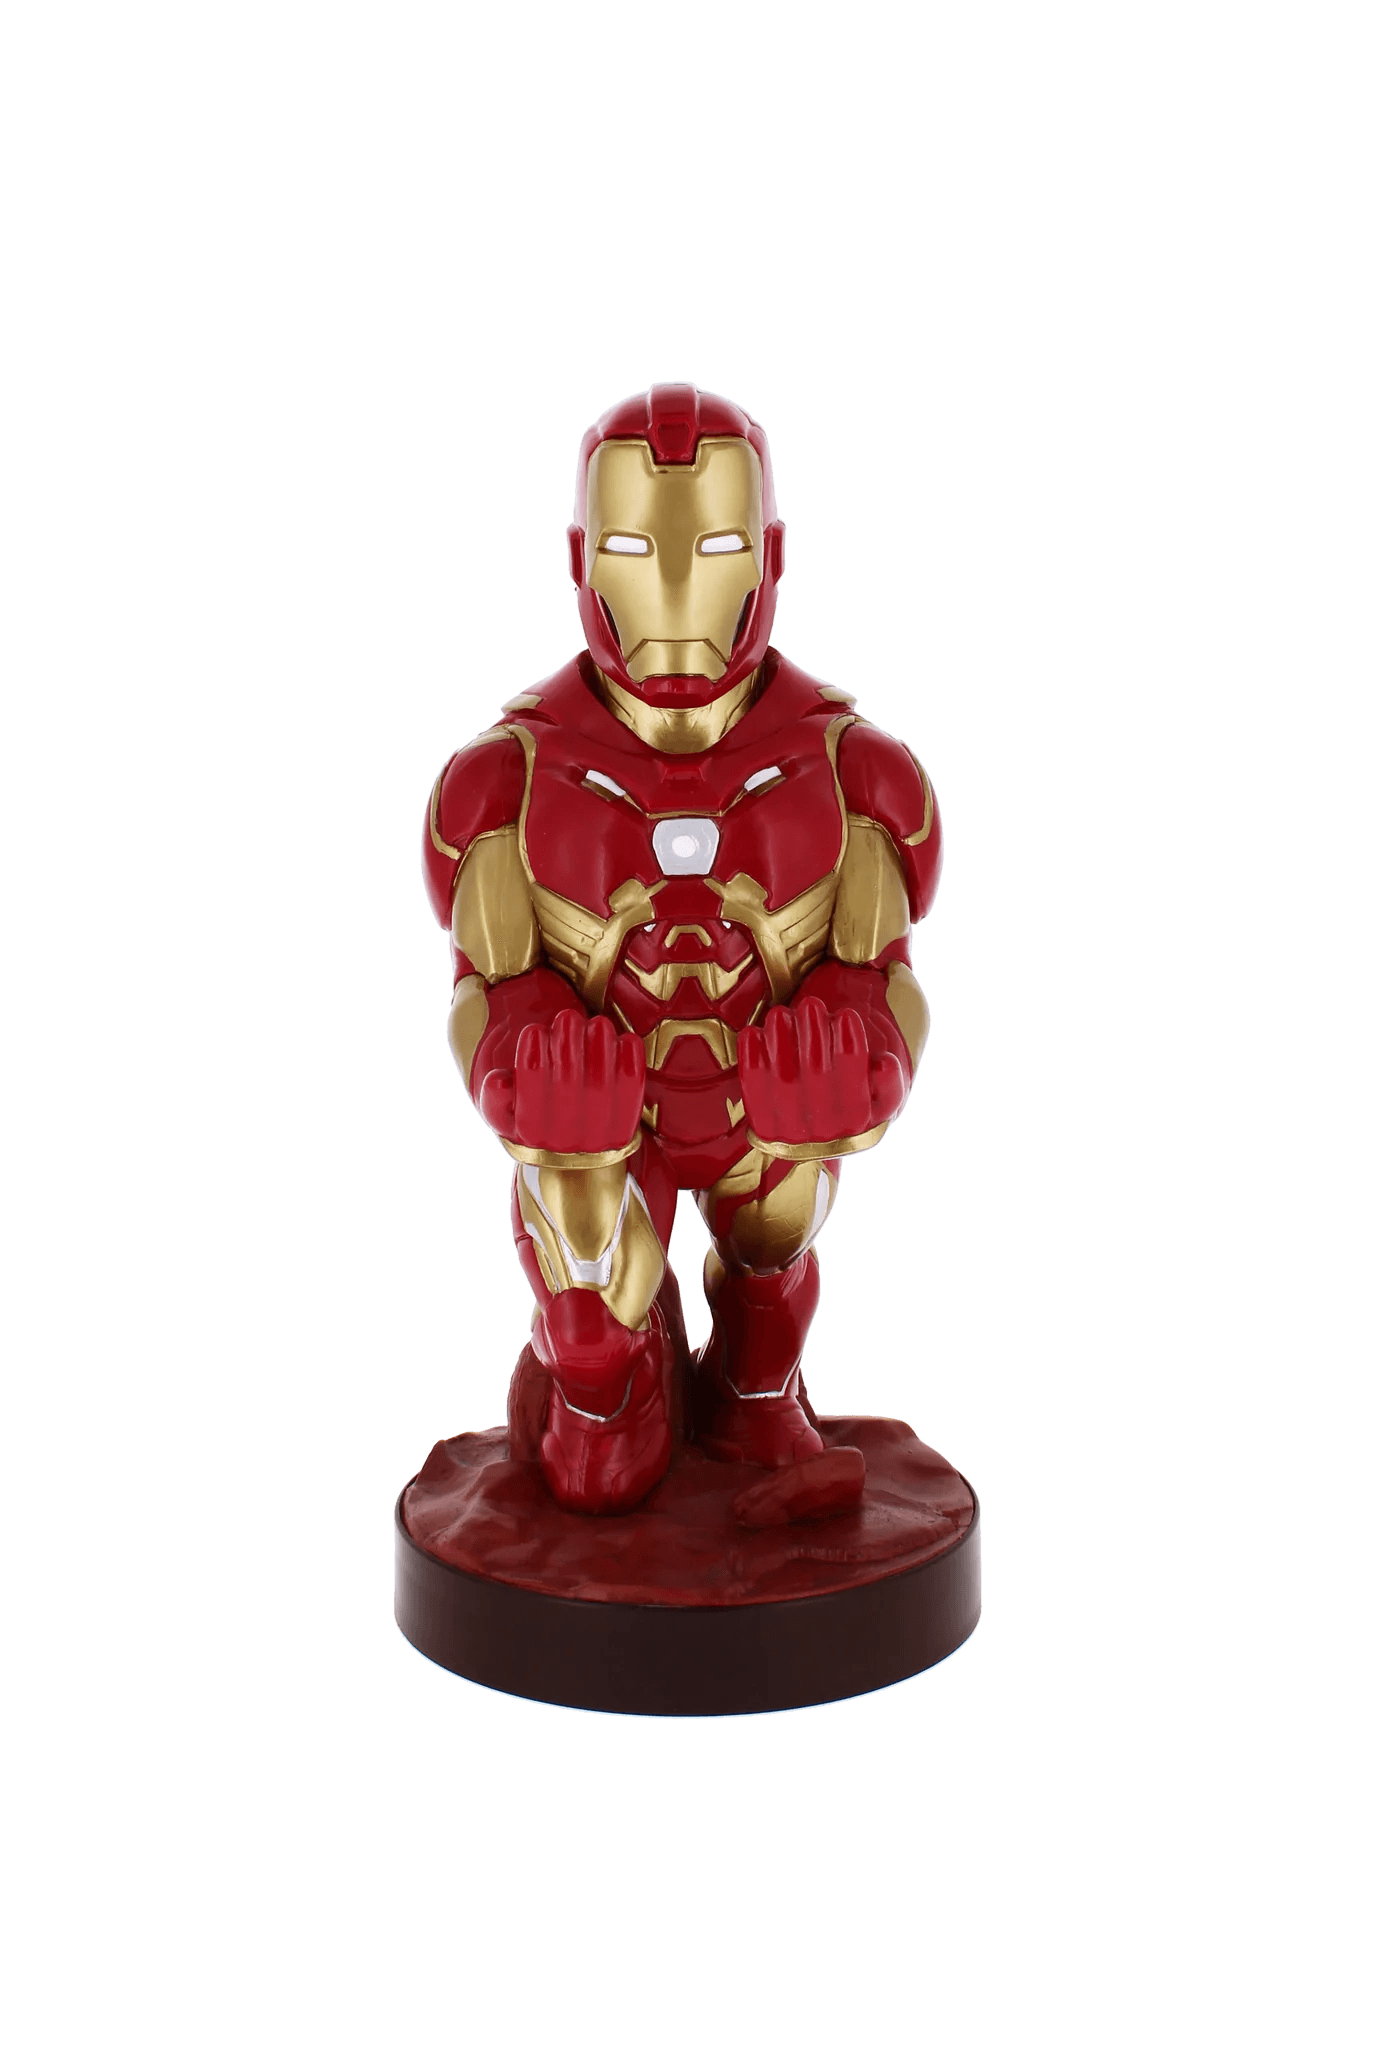 Cable Guys - Marvel - Iron Man - Phone & Controller Holder - The Card Vault